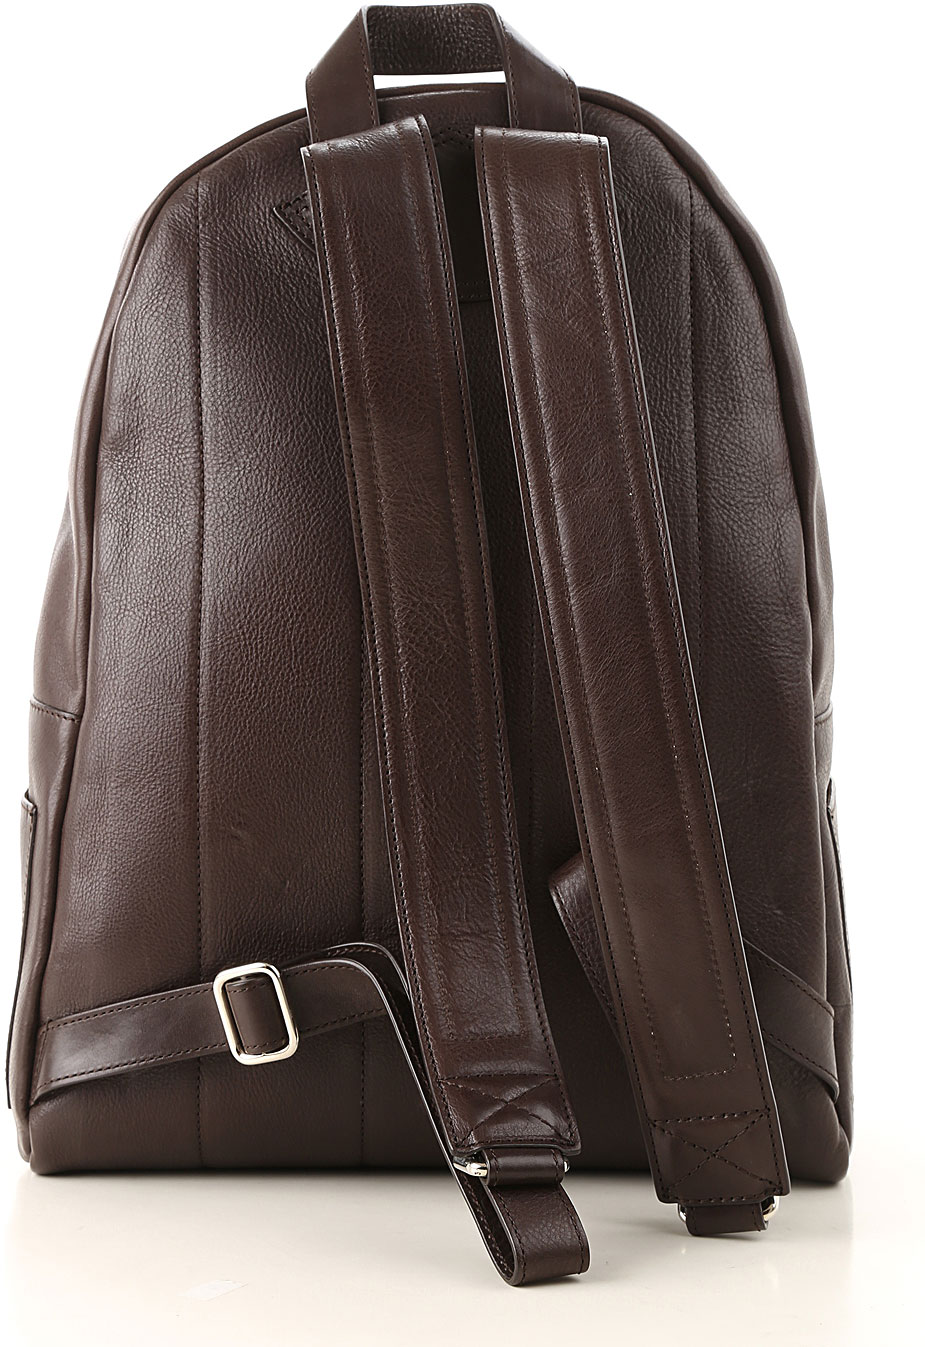 Briefcases Orciani, Style code: p00635-moro-